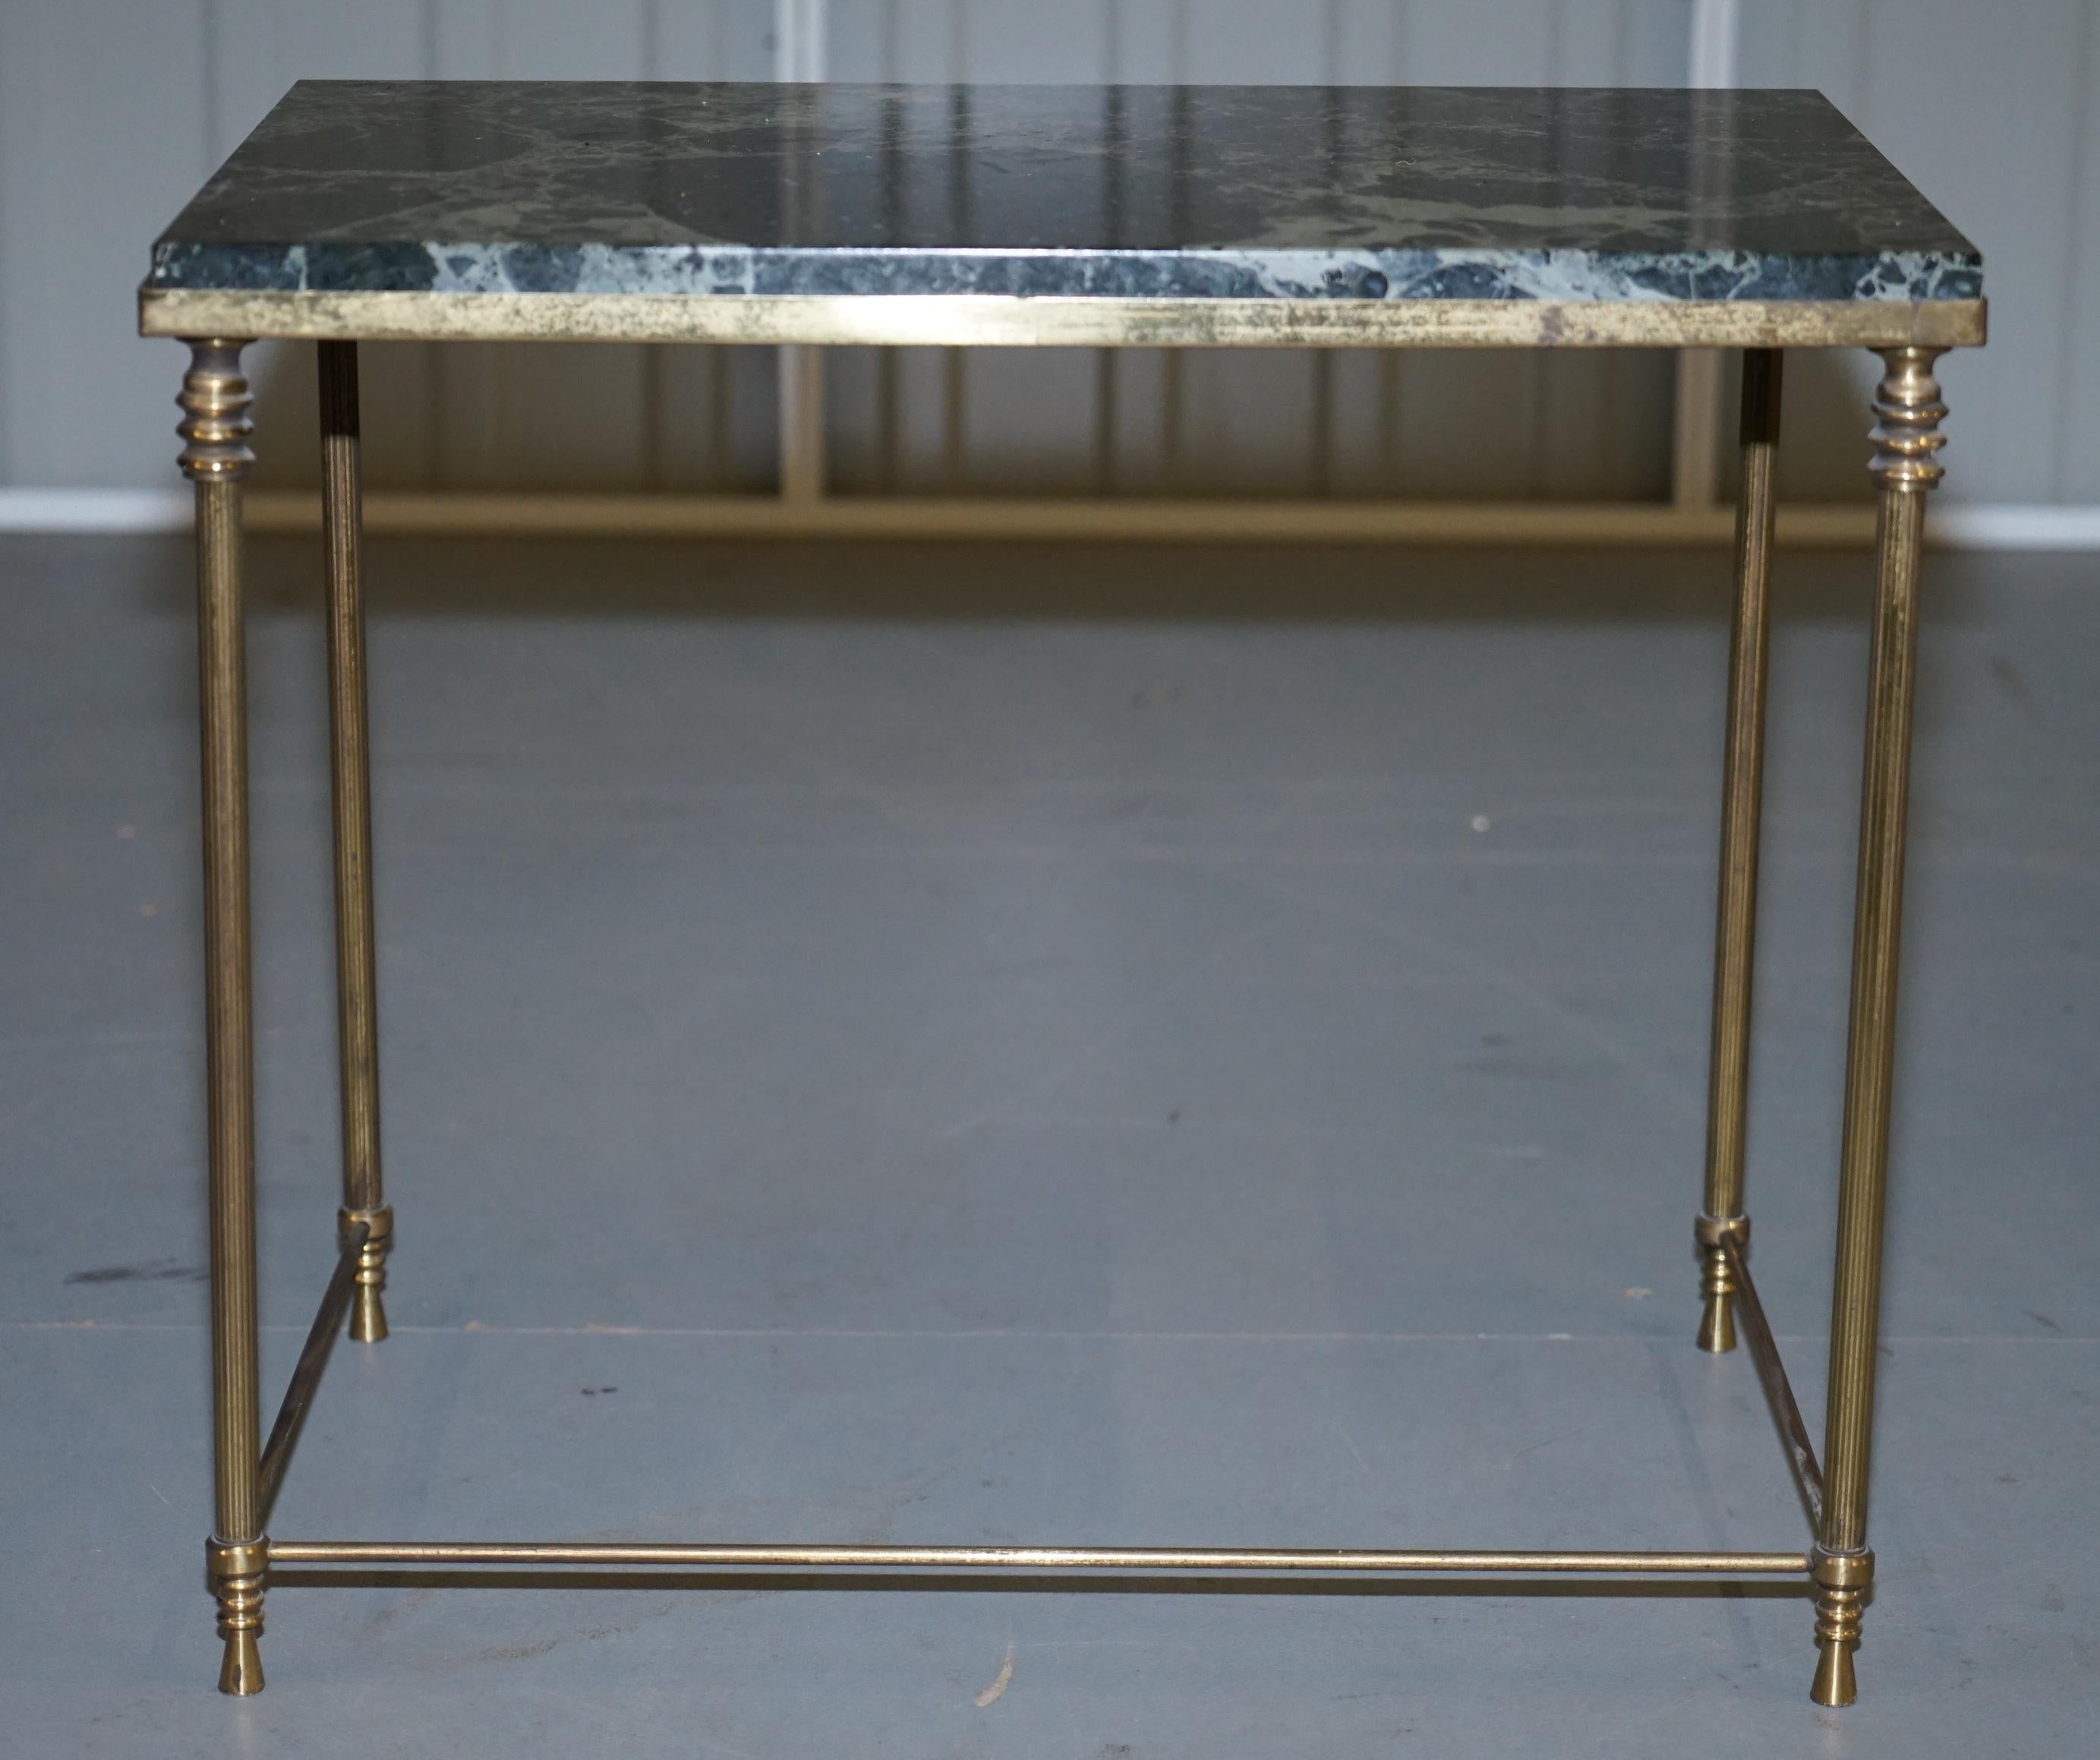 Vintage Italian Nest of Three Tables circa 1940s Brass with Thick Marble Top 5